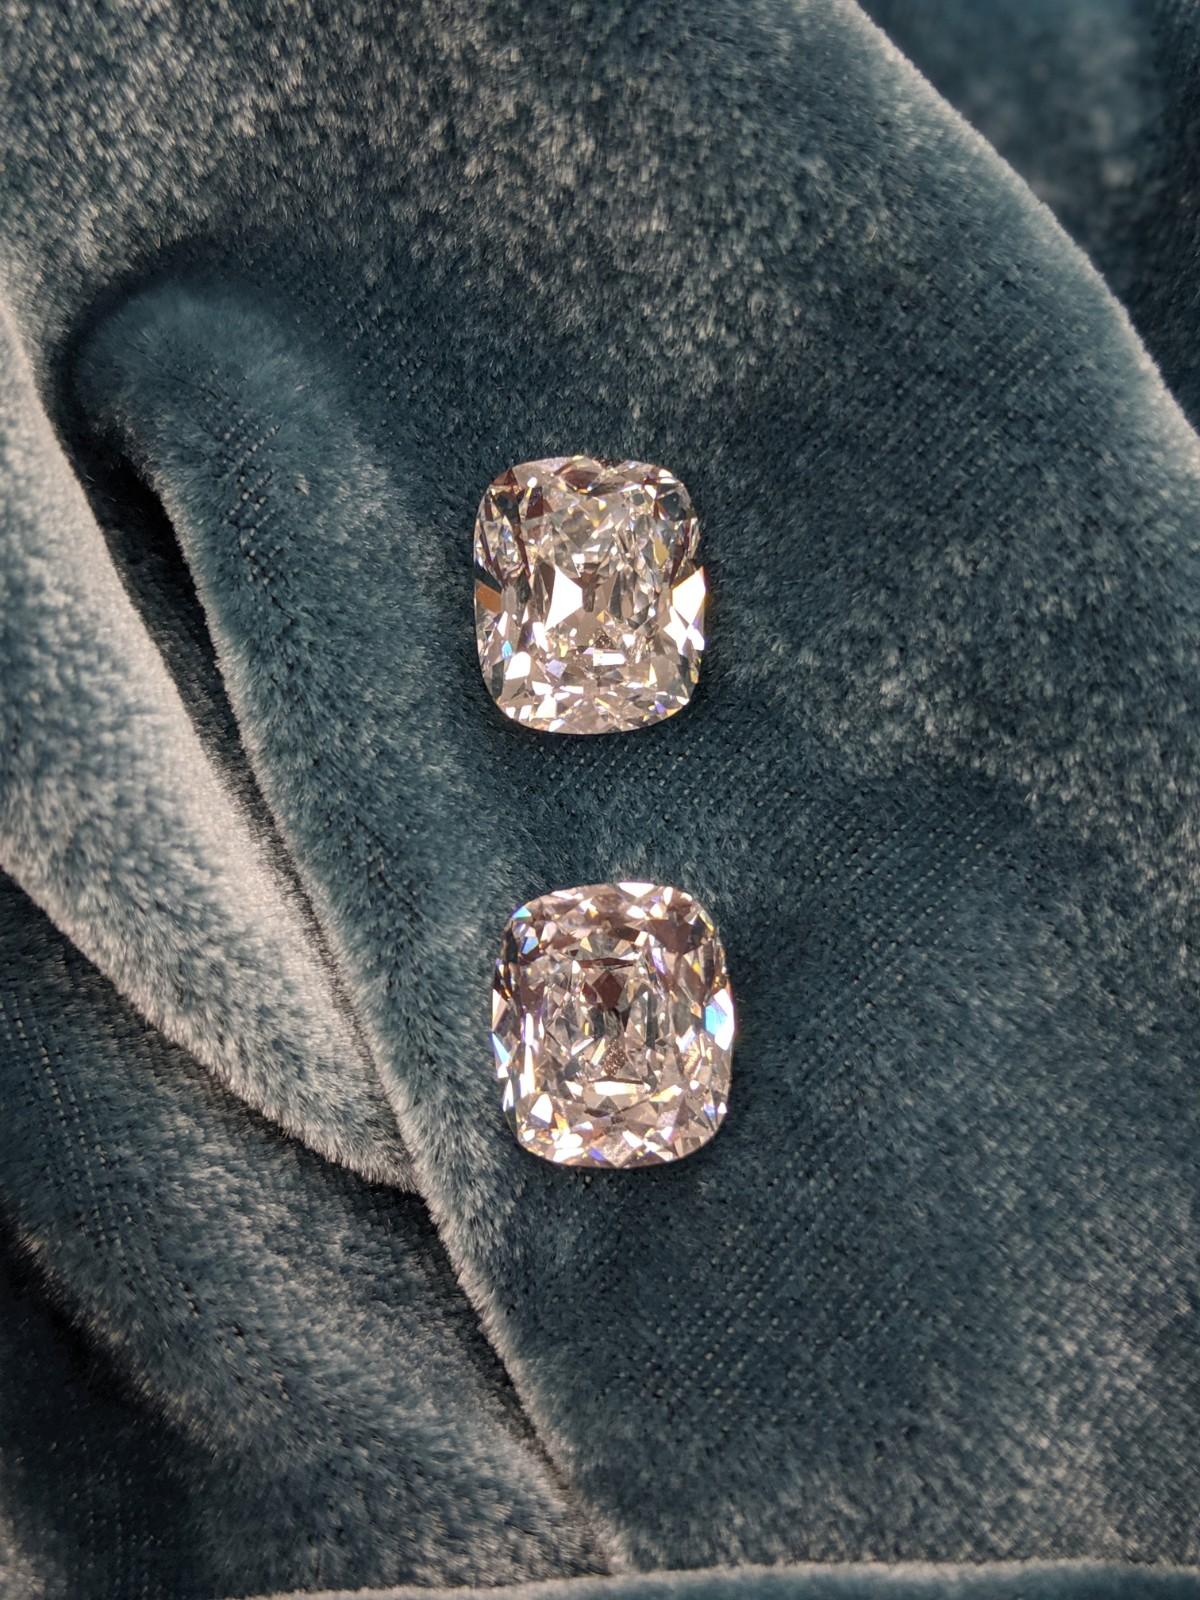 Contemporary 16 Carat Pair of Antique Cut Cushion Diamonds for Earrings D and E color GIA